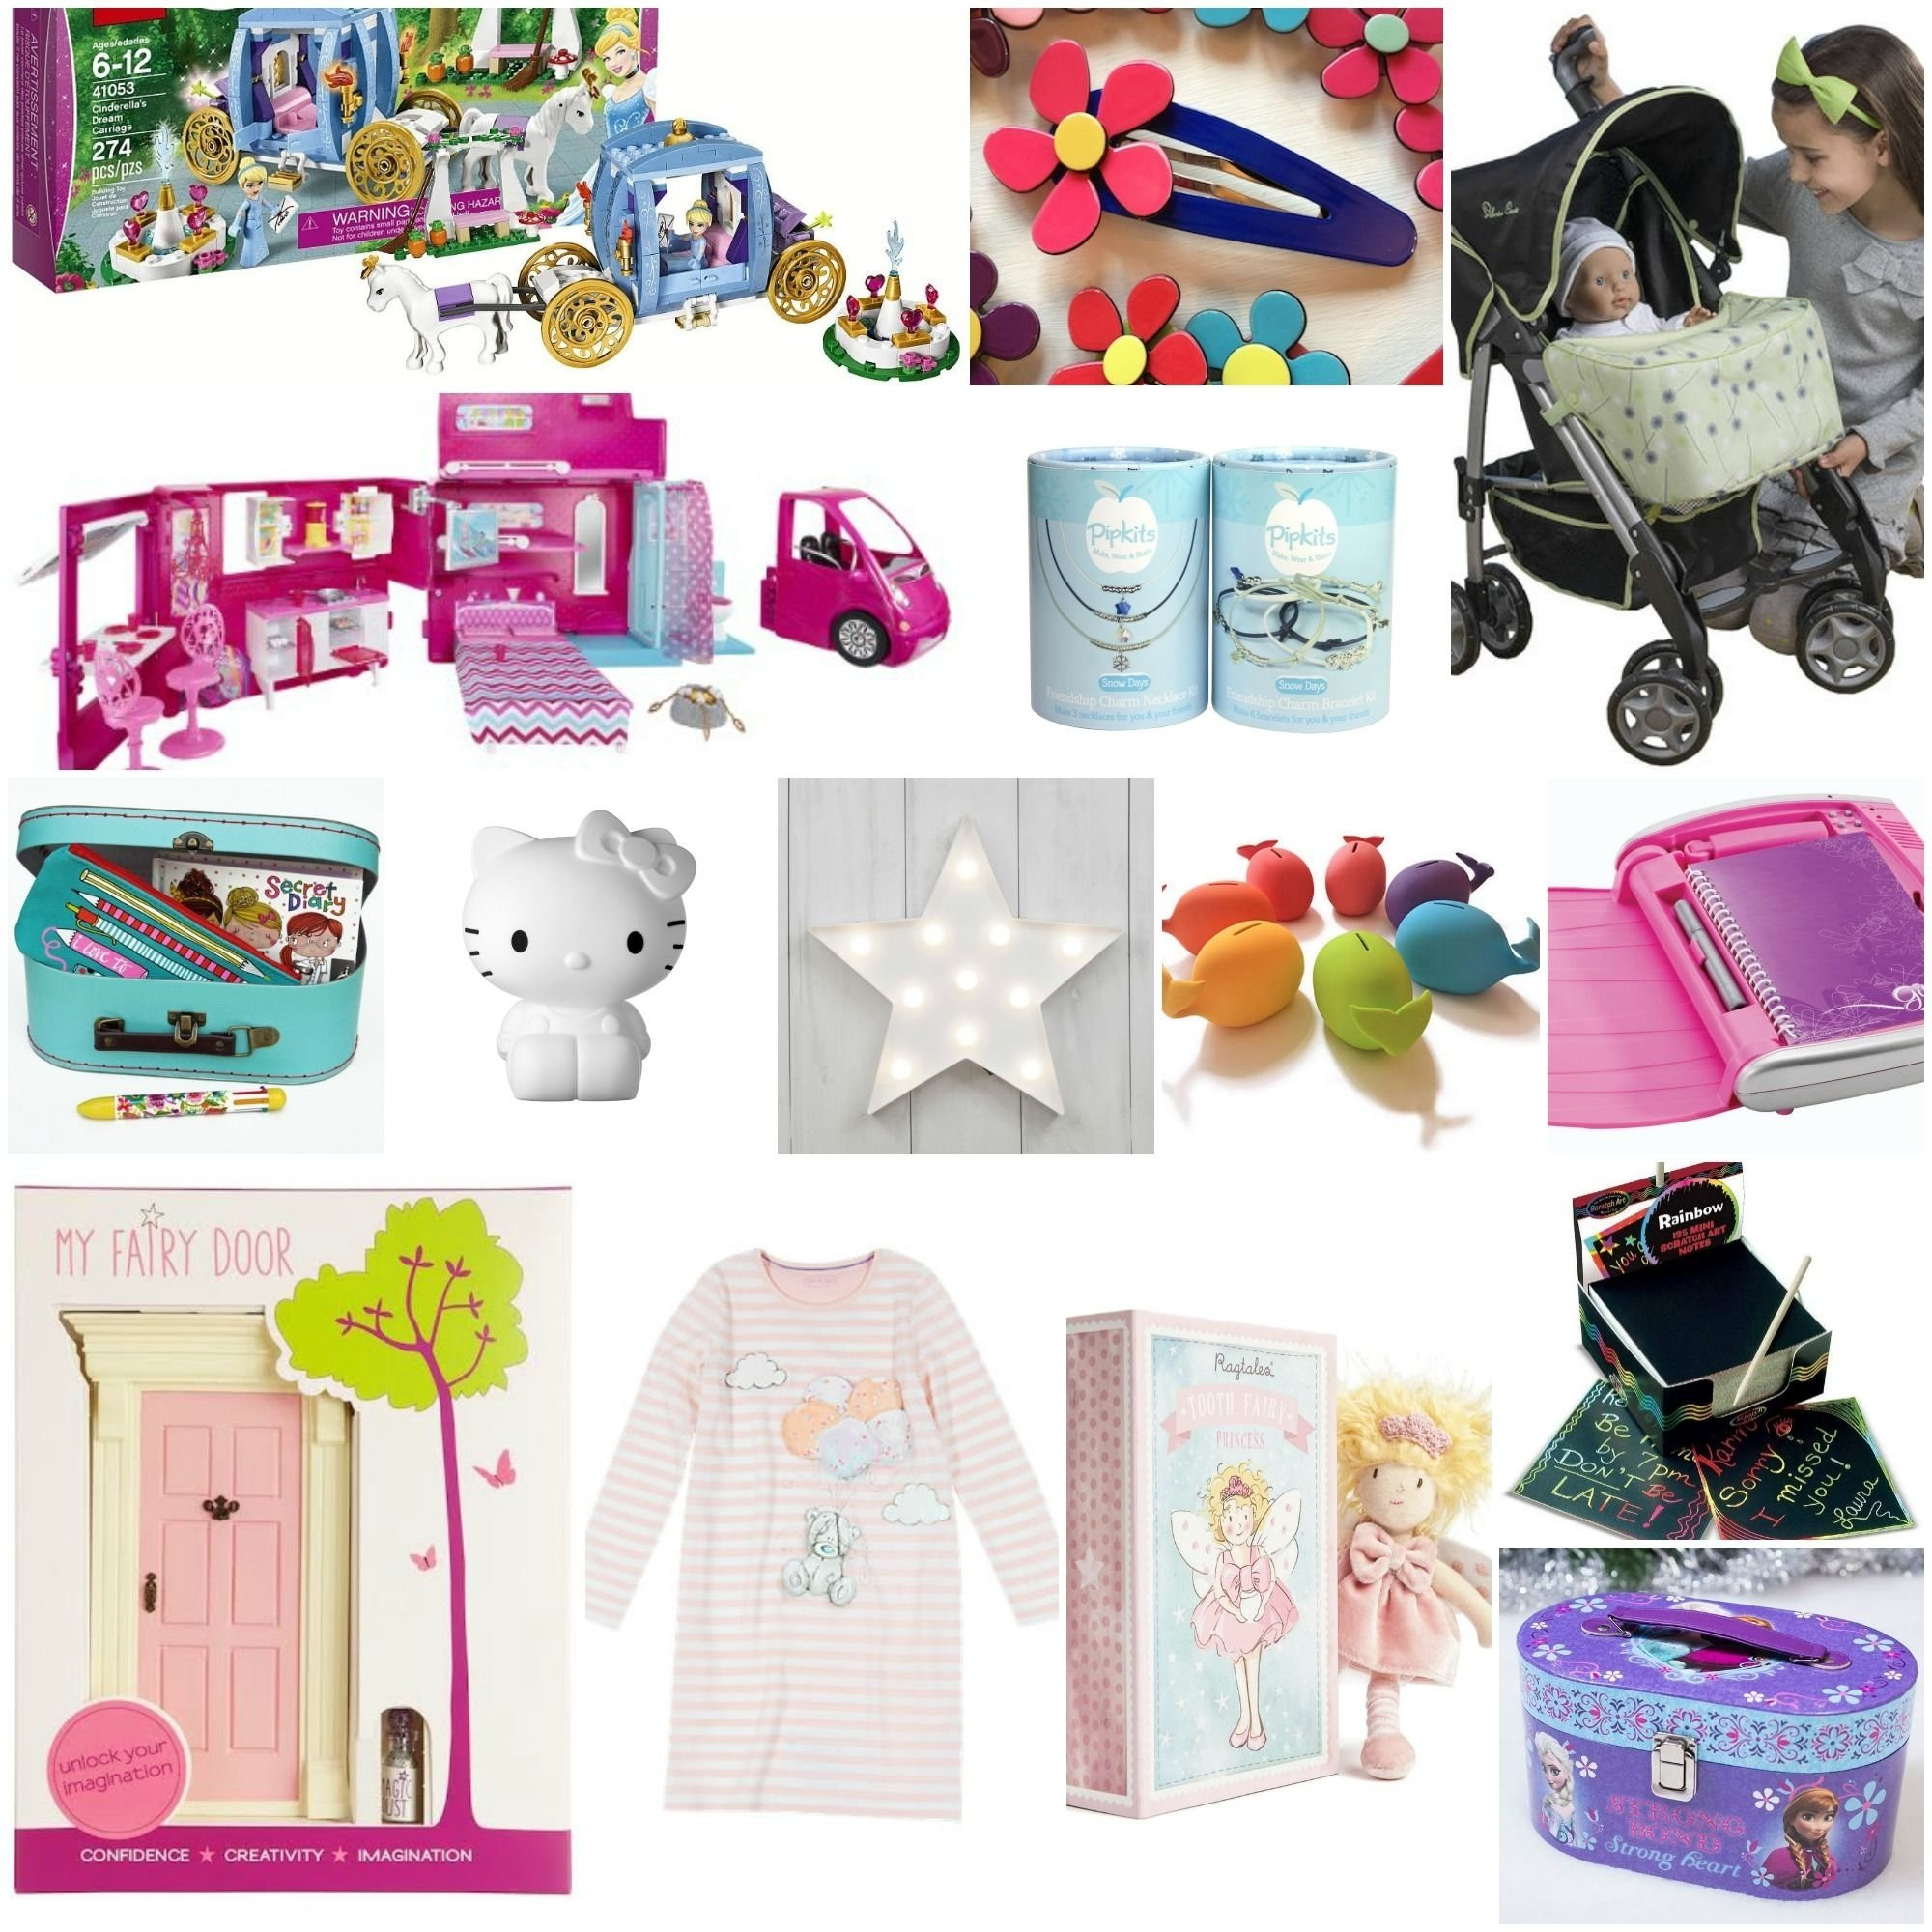 Gift Ideas For Girls Age 10
 10 Great Gift Ideas For Girls Age 6 2020